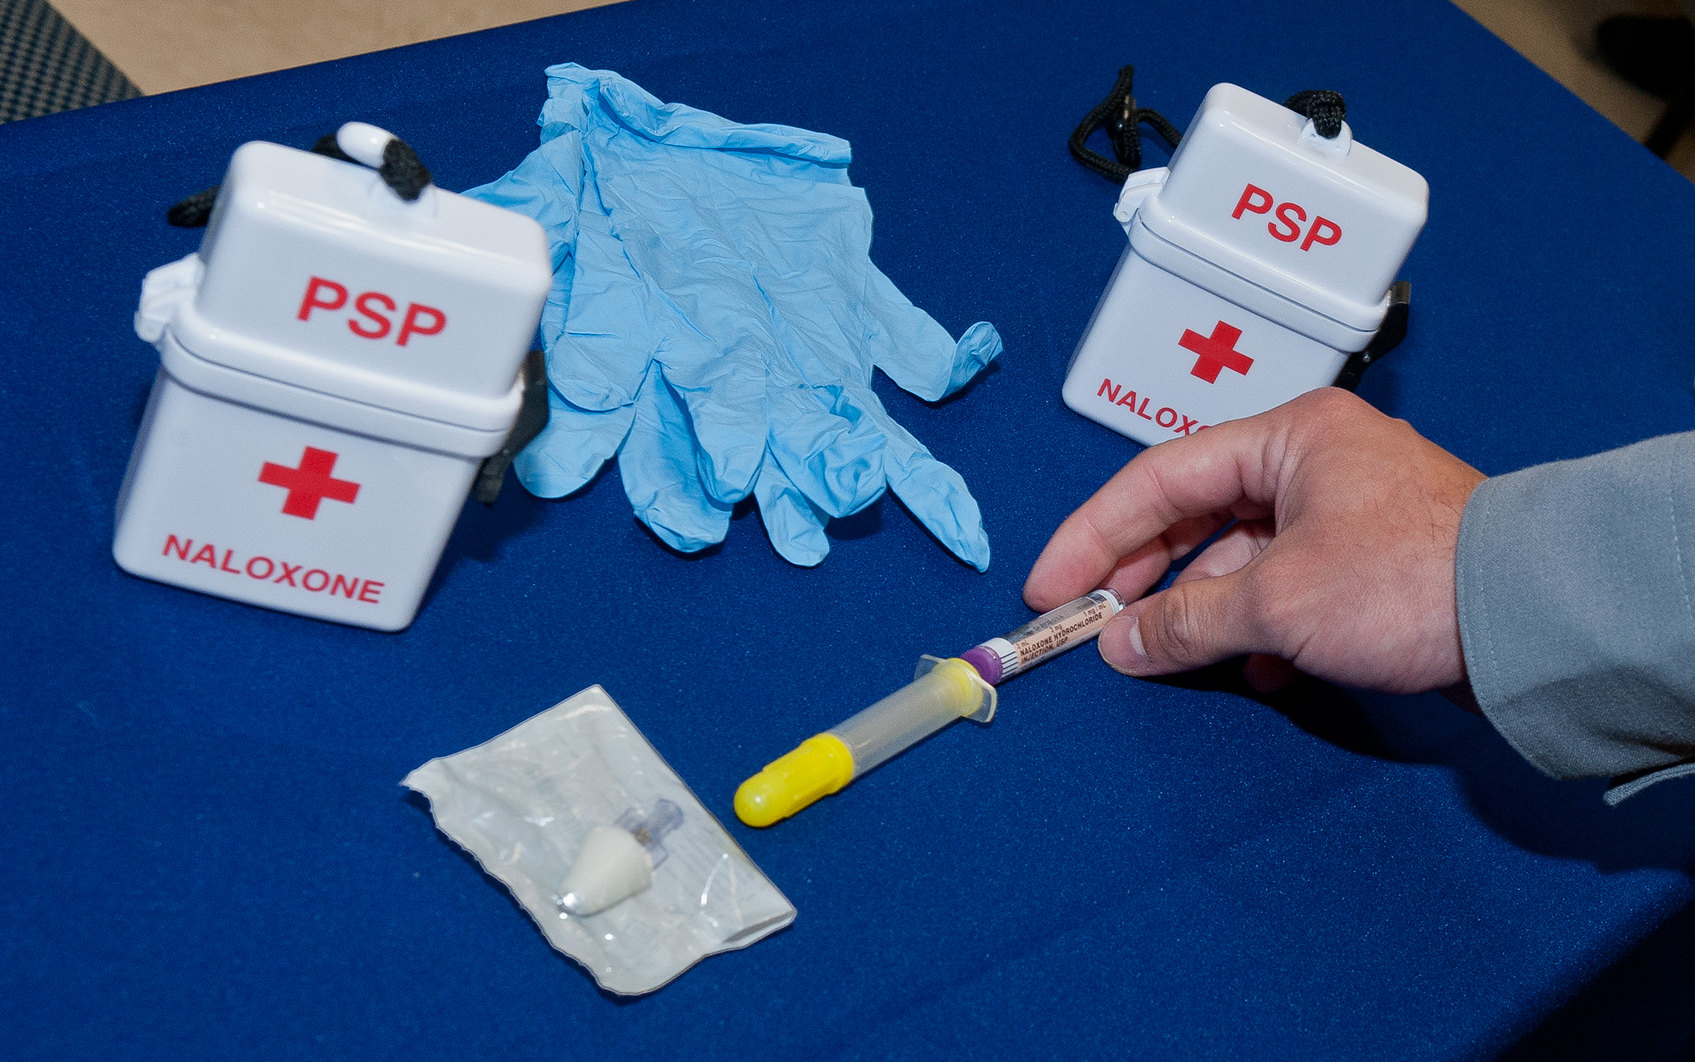 A hand holding a syringe on a table with latex gloves and two naloxone kits.